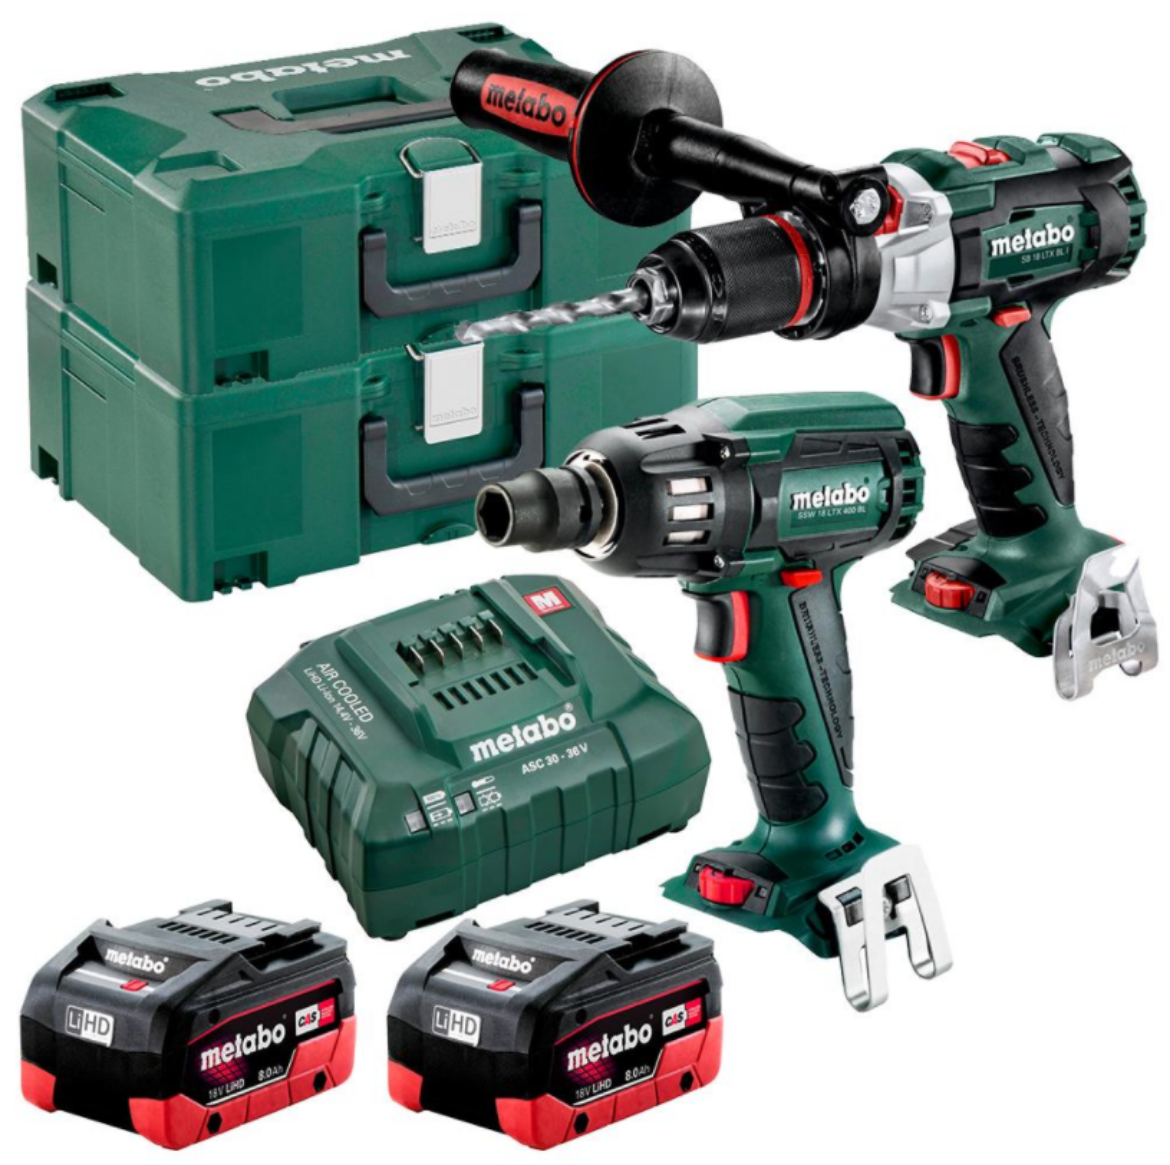 Picture of 18 V BRUSHLESS, HAMMER DRILL /SCREWDRIVER 120 NM +
18 V BRUSHLESS 1/2 IMPACT WRENCH 130-400 NM
(2 x 8.0 AH LIHD BATTERY PACKS, ASC 55 V AIR-COOLED CHARGER, 2 x METALOC II CASES)